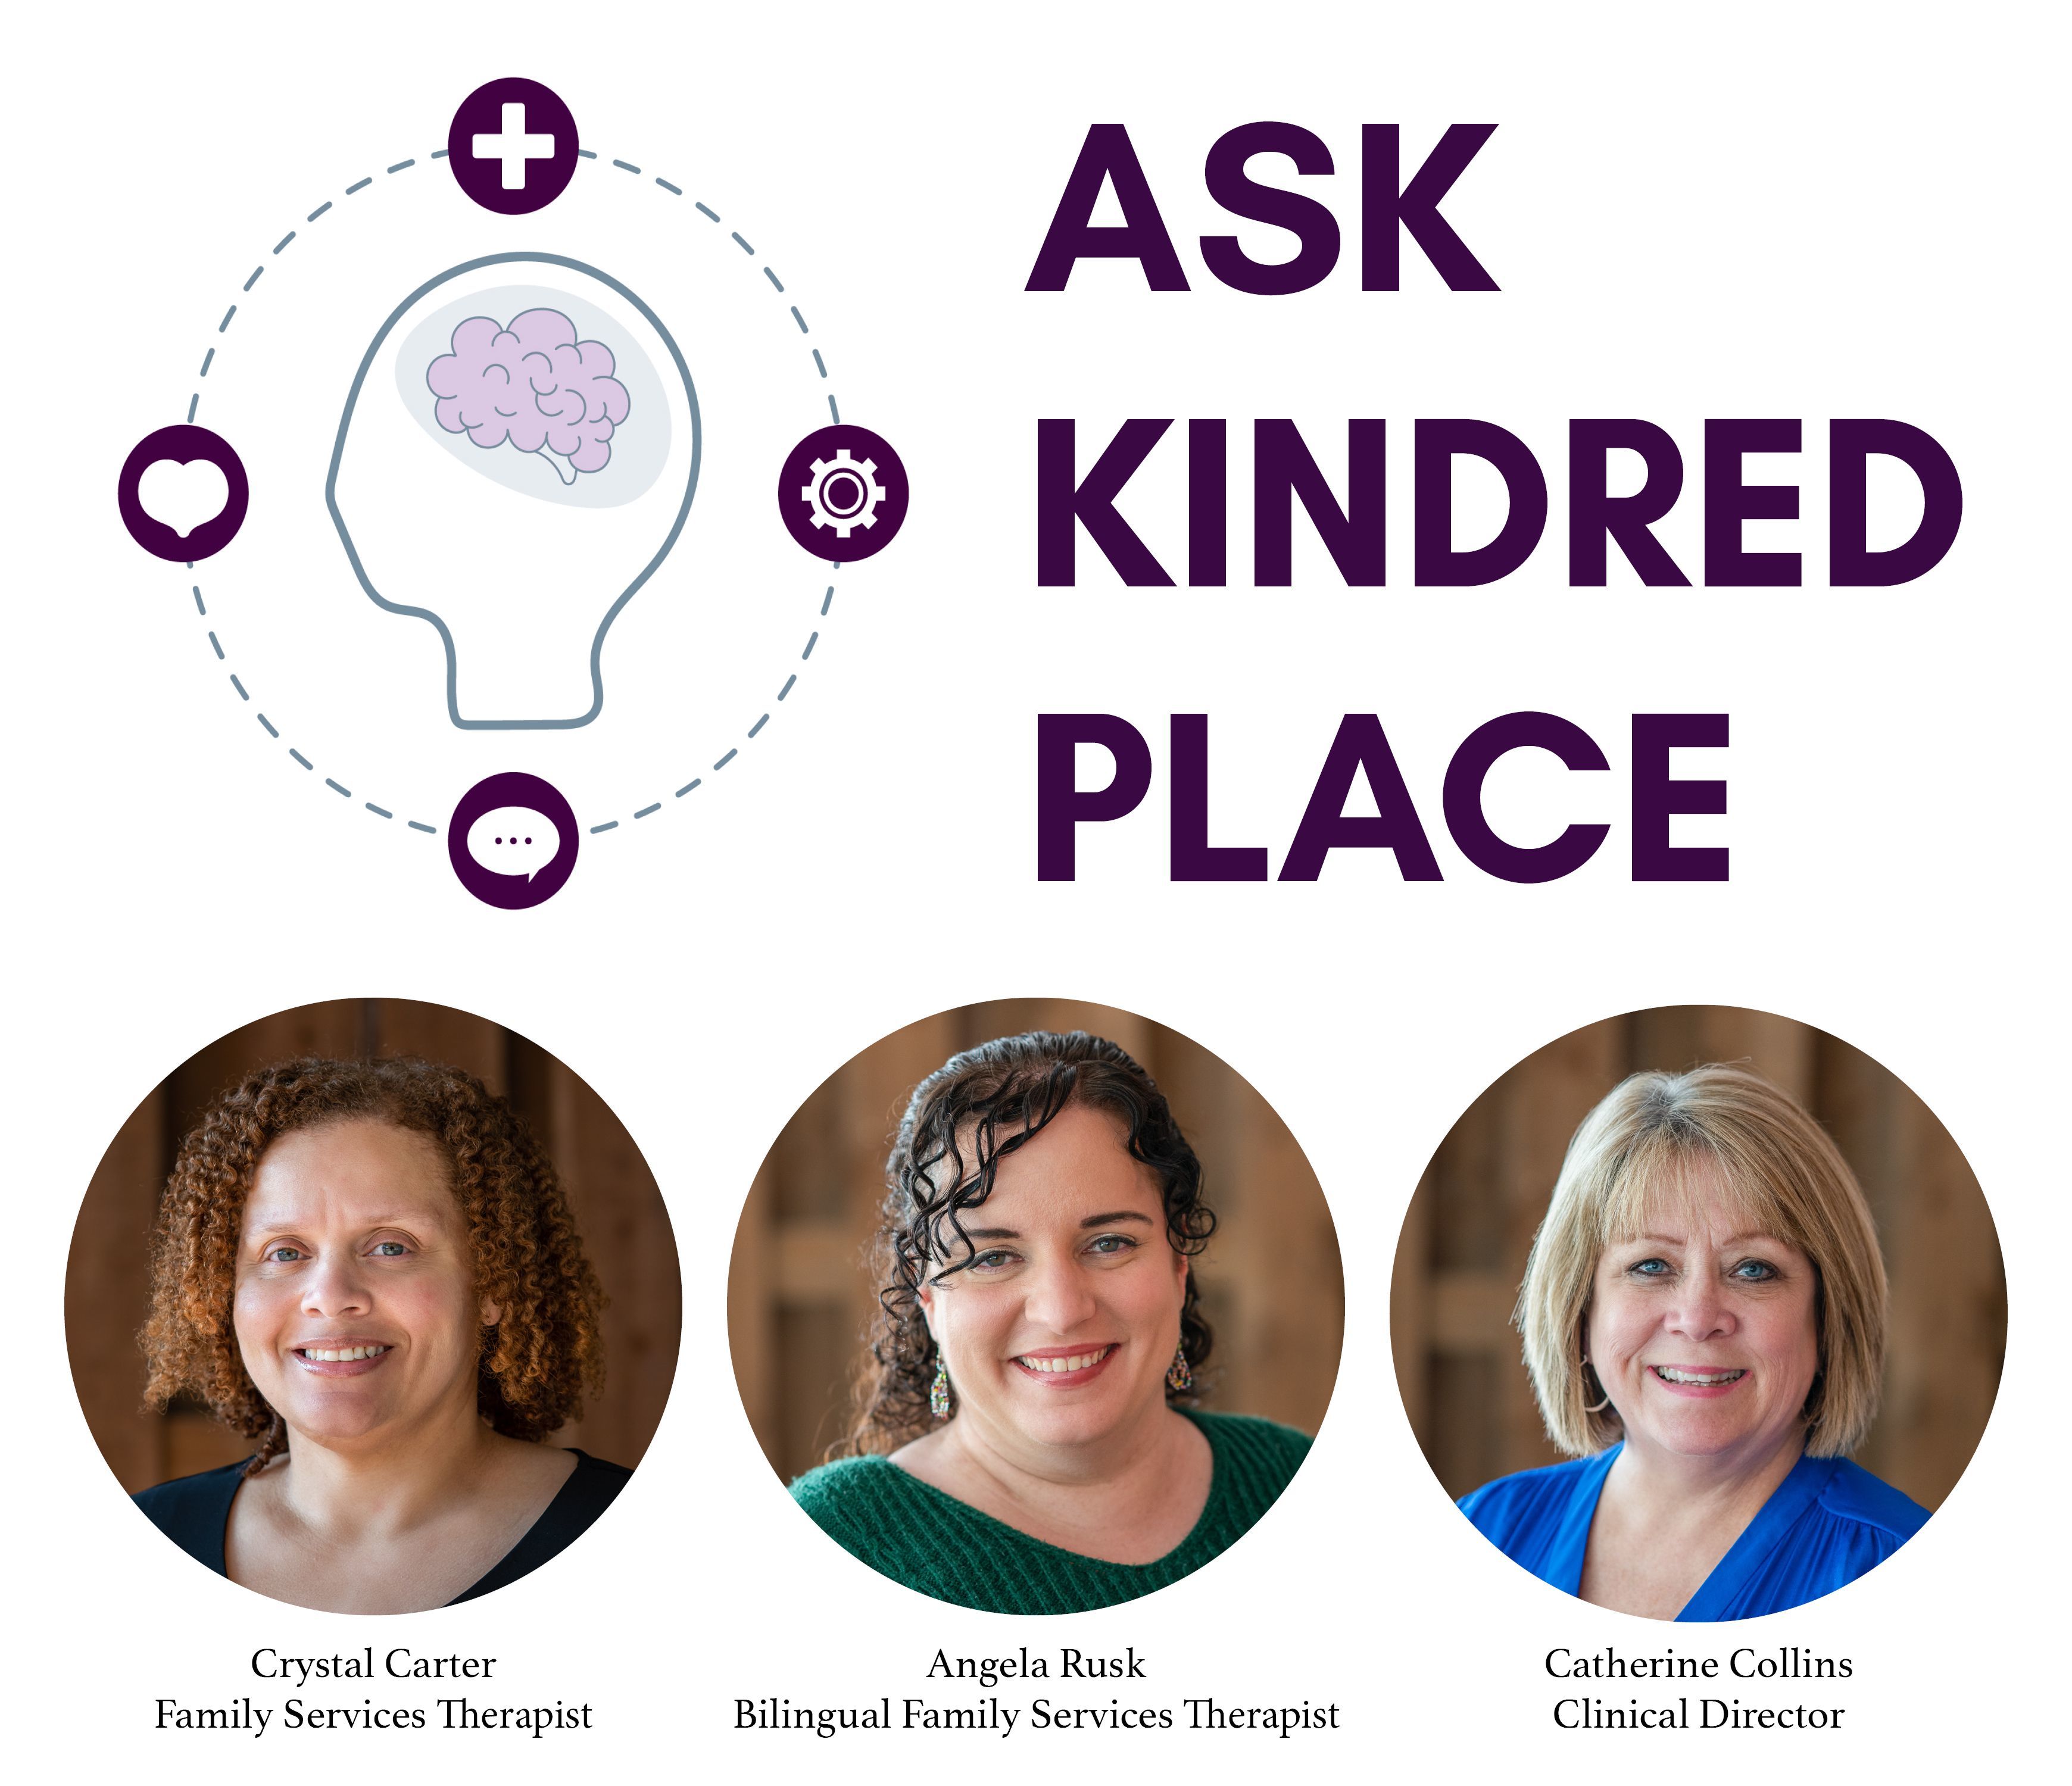 Ask Kindred Place - This social isolation is depleting my energy, how can I cope?